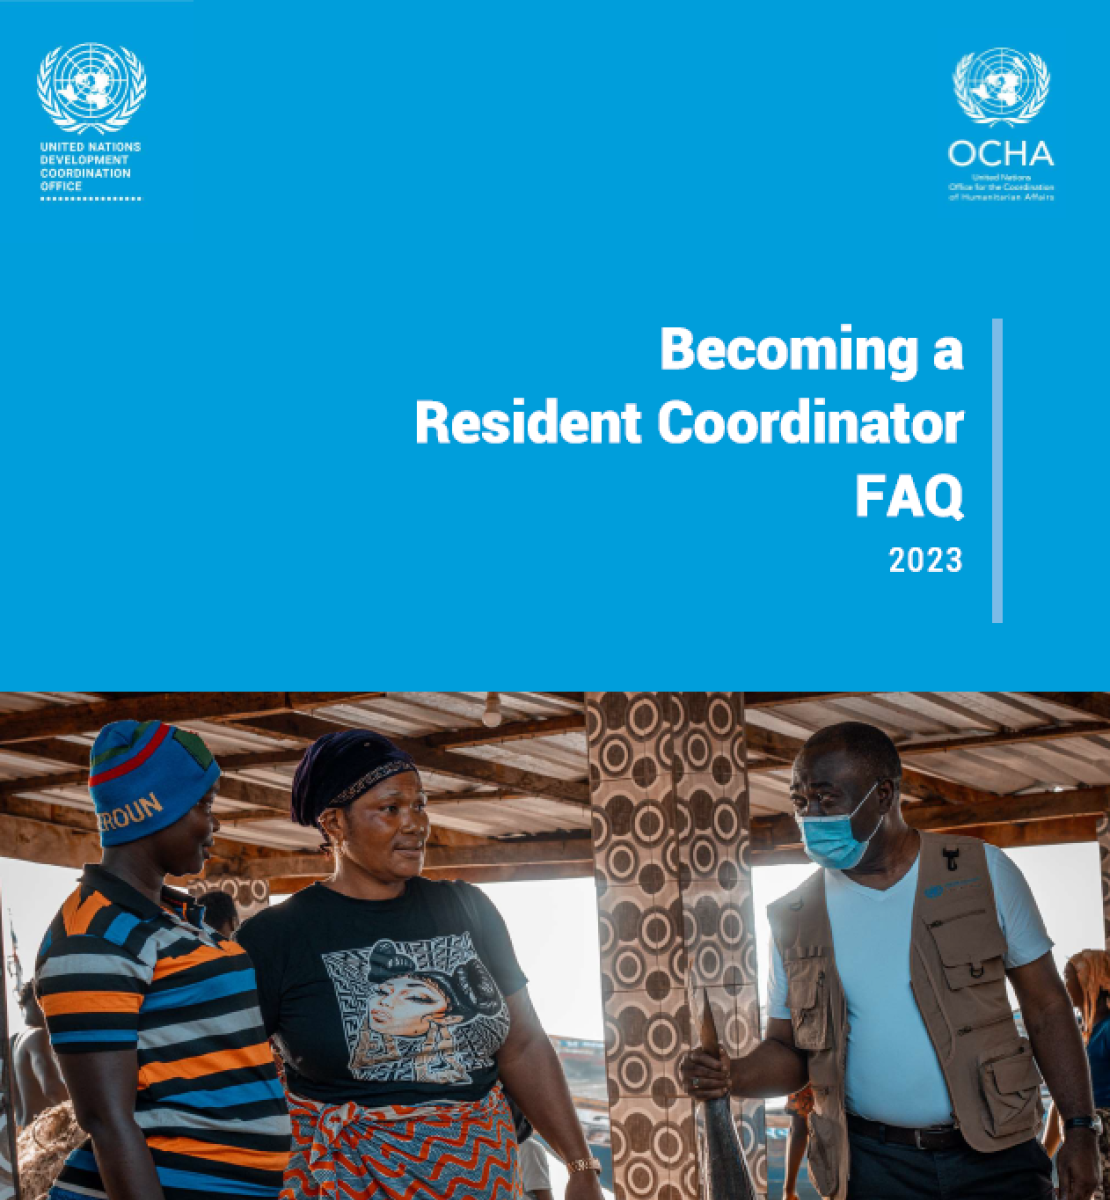 This document highlights the frequently asked questions relevant to becoming a Resident Coordinator.